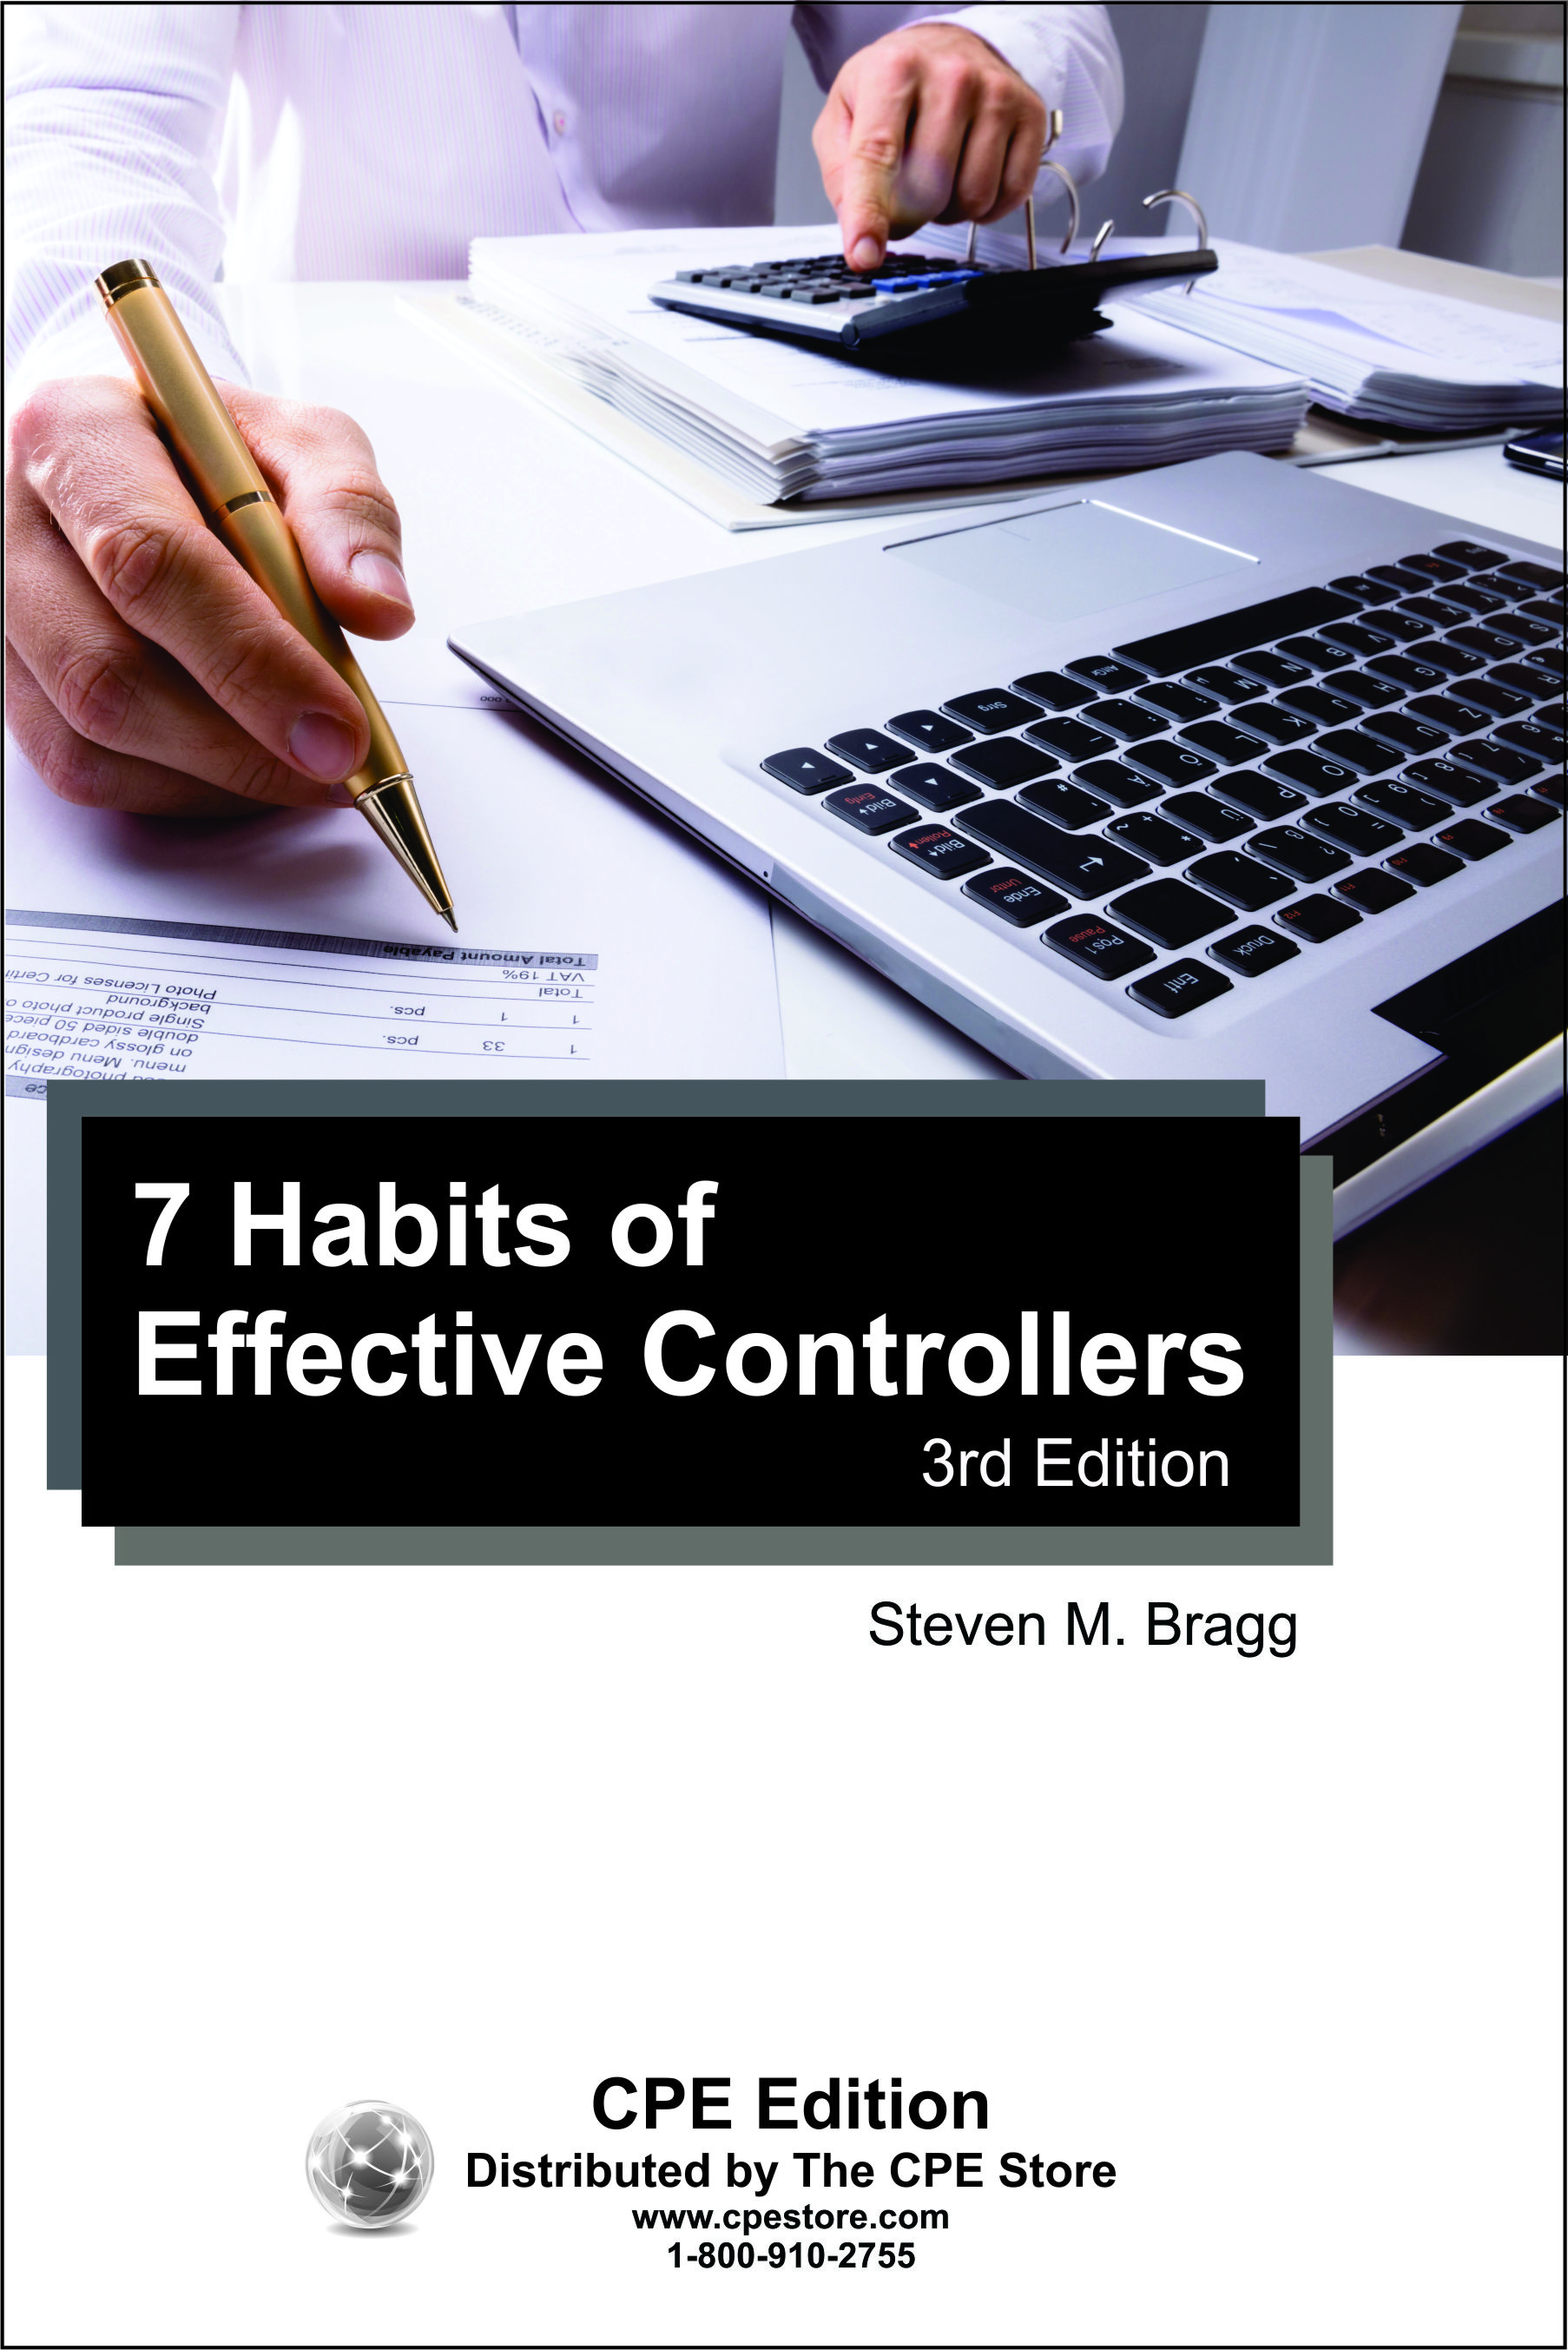 7 Habits of Effective Controllers